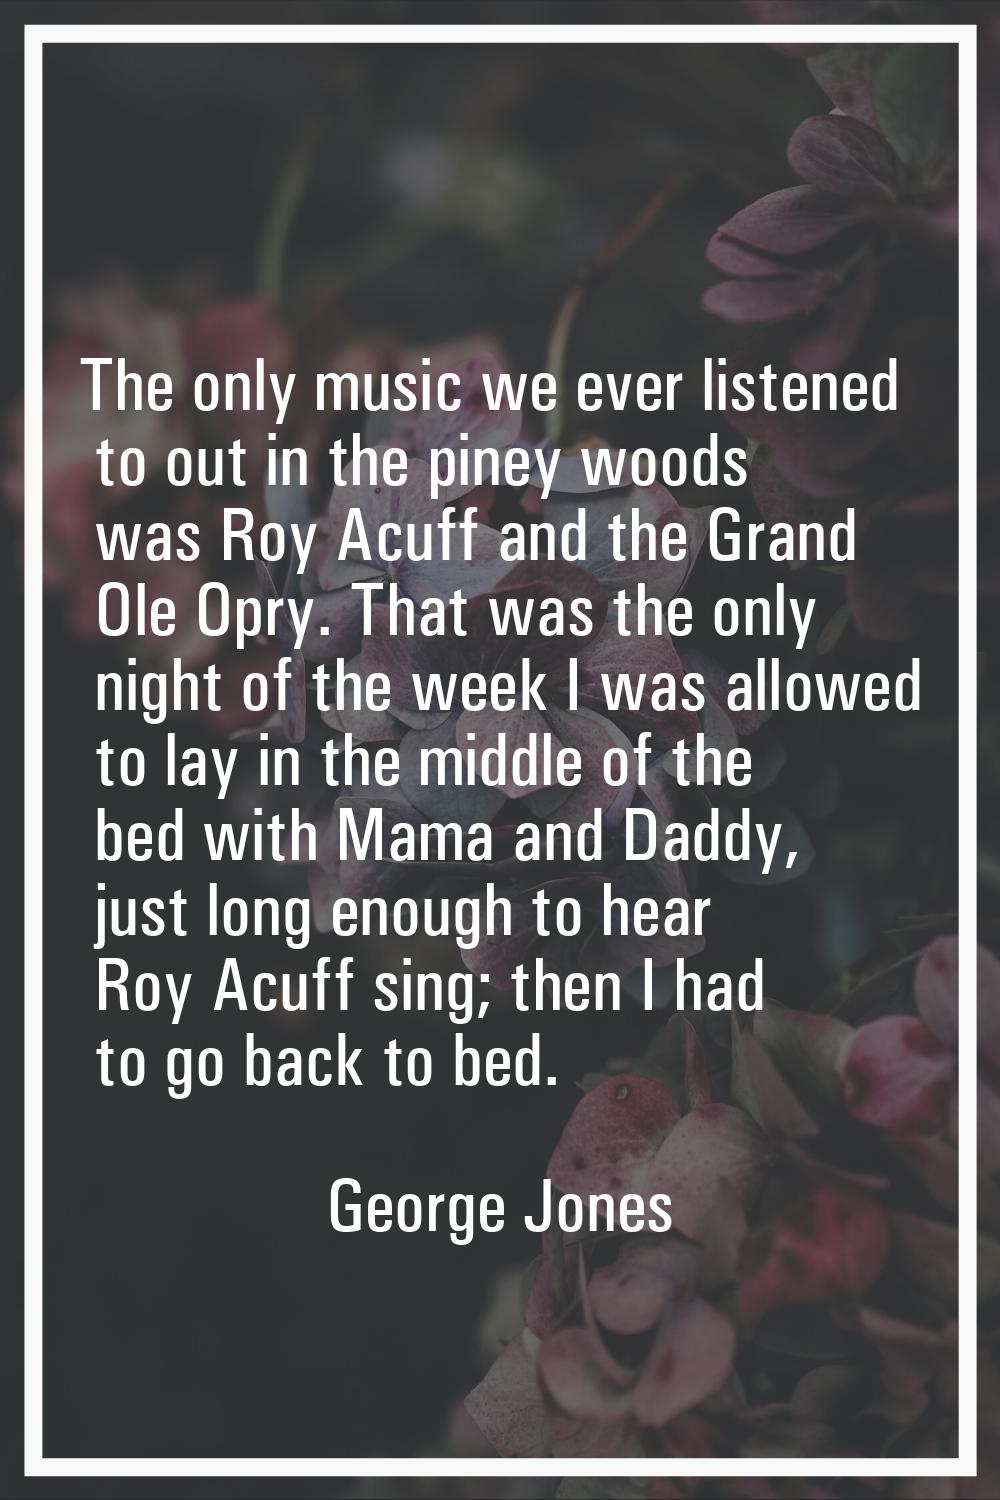 The only music we ever listened to out in the piney woods was Roy Acuff and the Grand Ole Opry. Tha